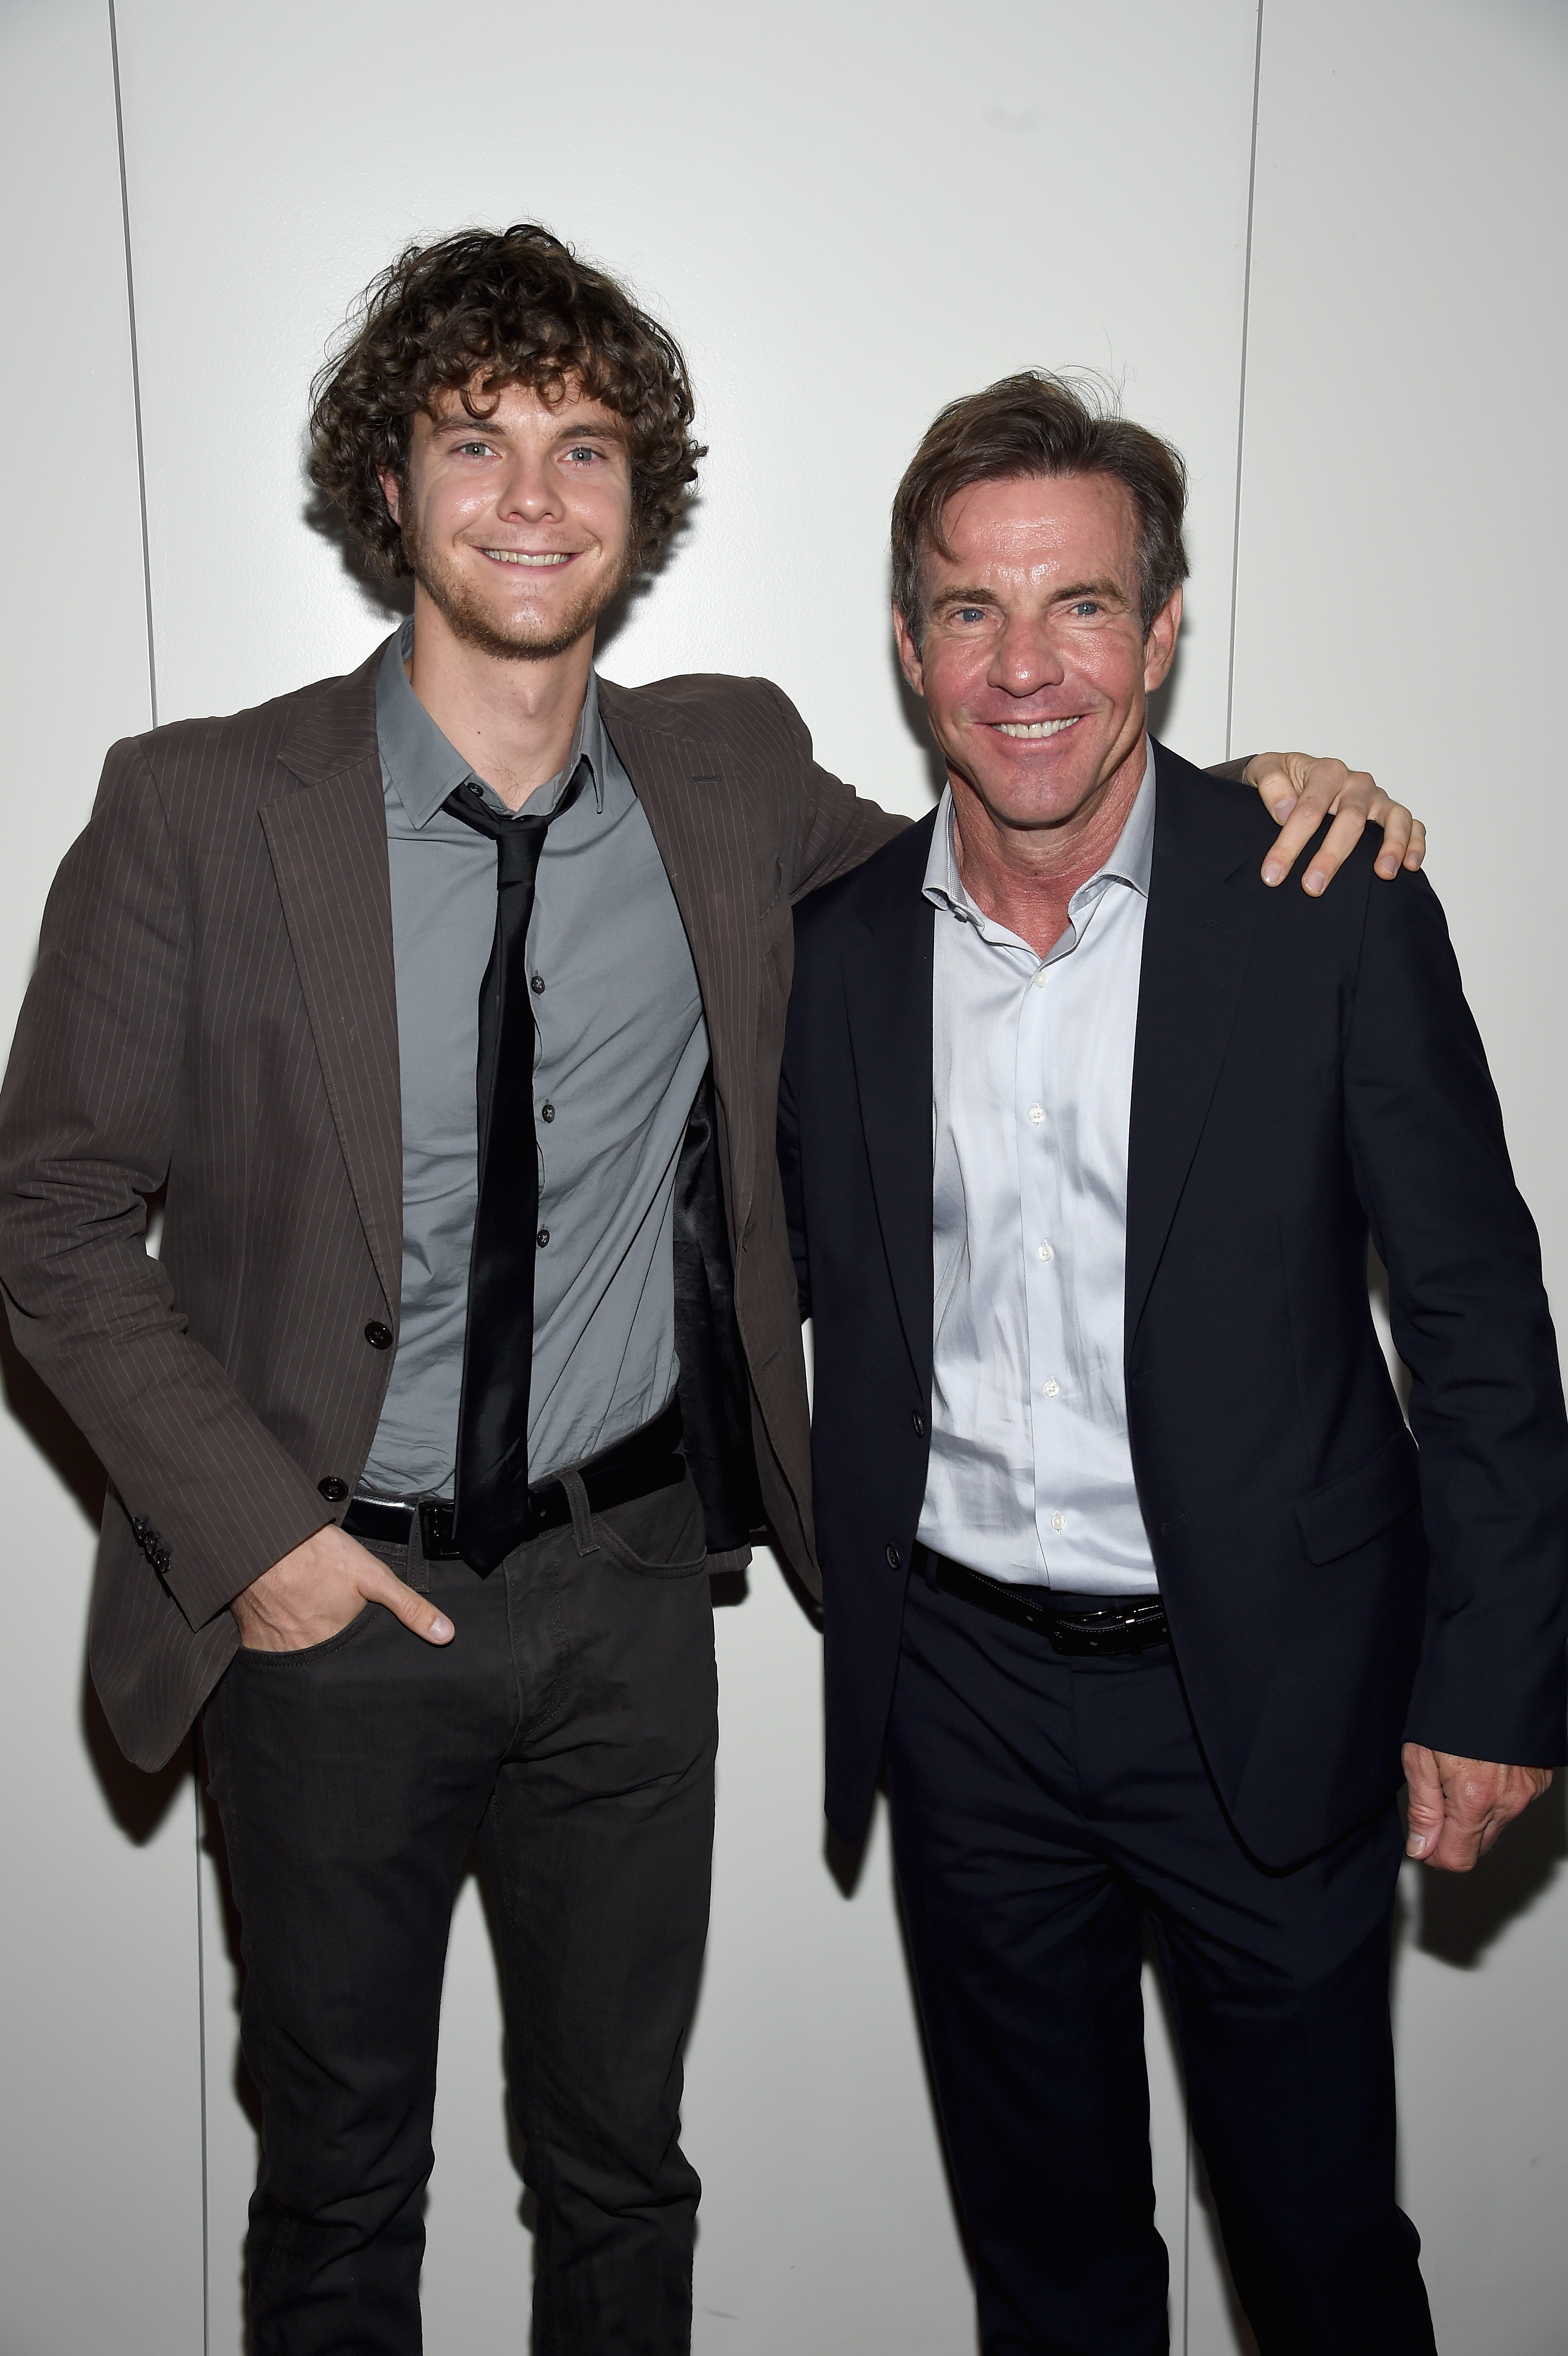 Jack and Dennis Quaid at the Armani and Cinema Society Screening of Sony Pictures Classics' "Truth" after party in New York City, 2015 | Source: Getty Images